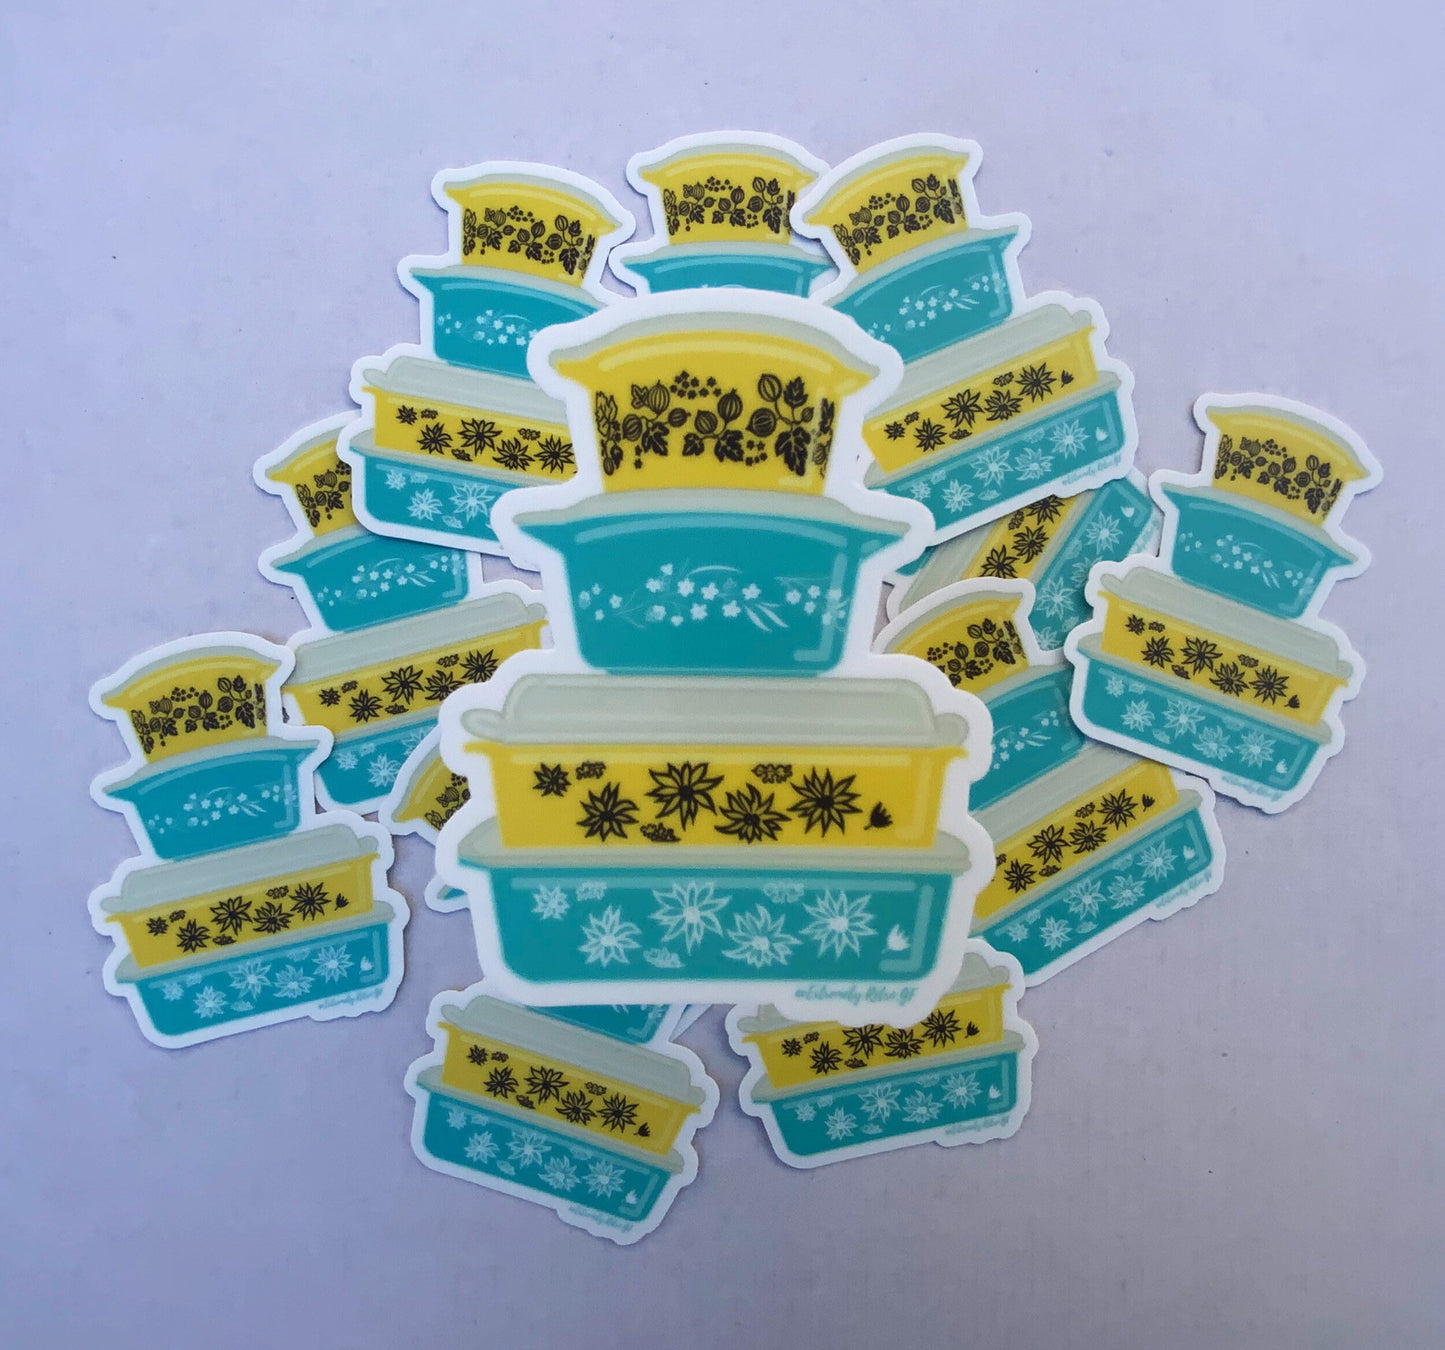 Vintage Pyrex Dishes Sticker - Turquoise Blue and Sunshine Yellow